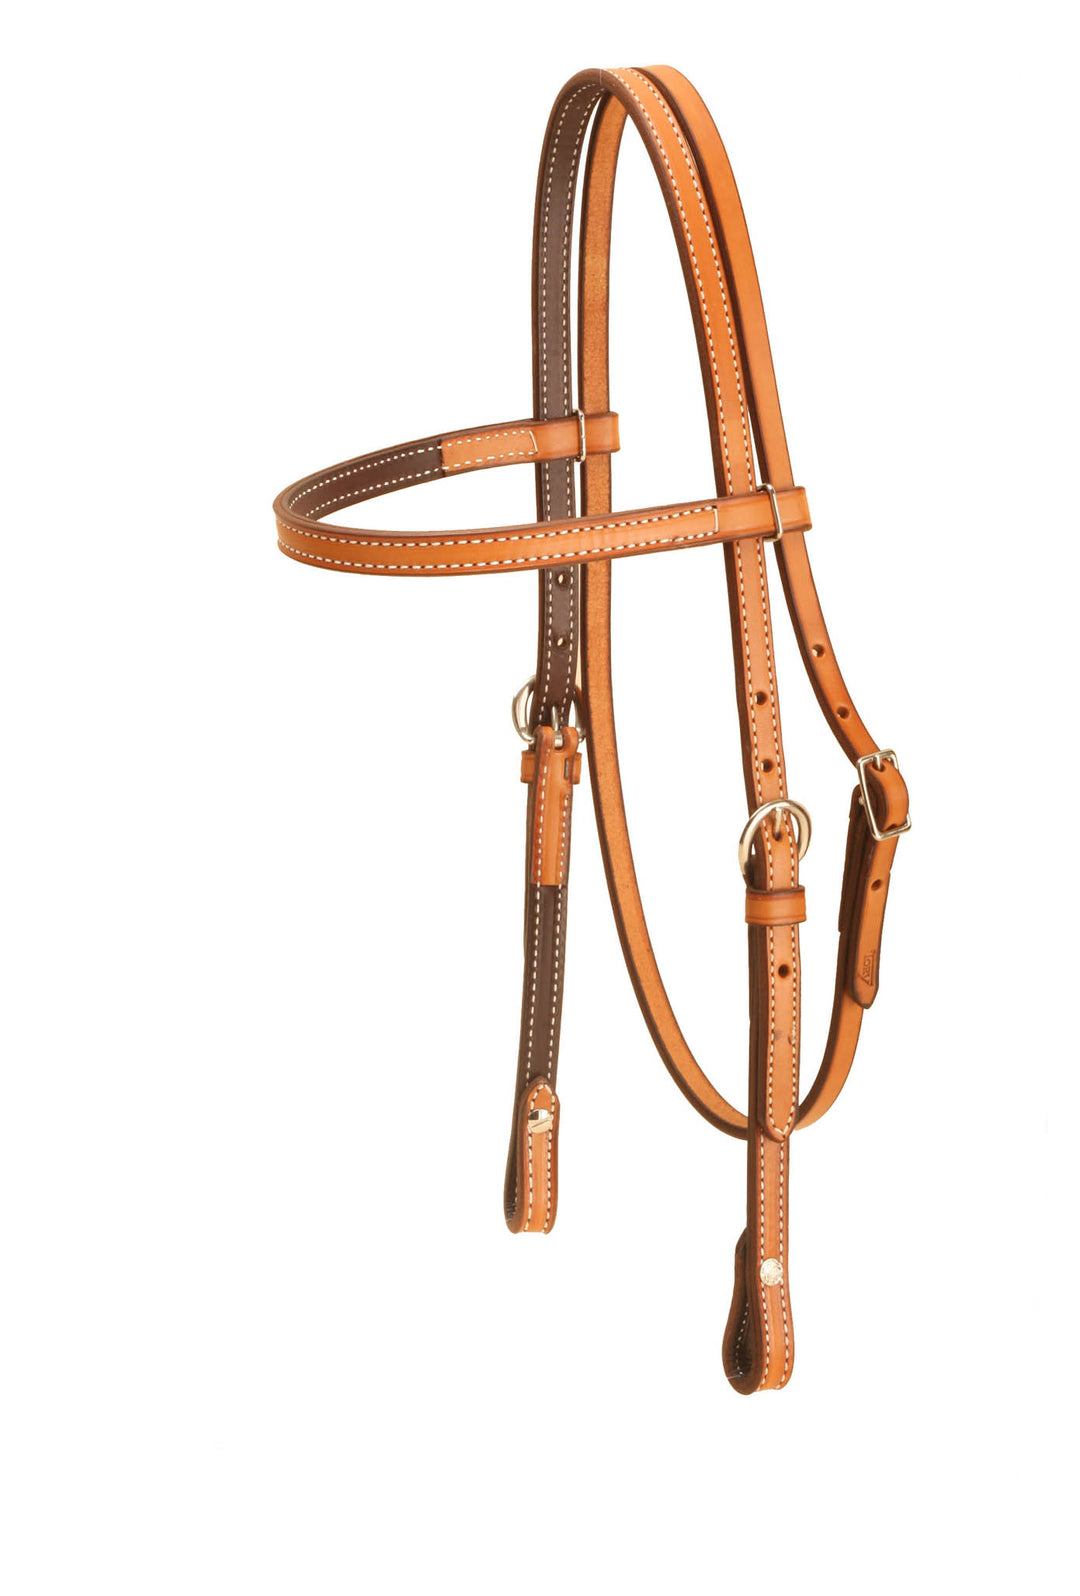 Tory Leather 5/8" Double and Stitched Browband Headstall